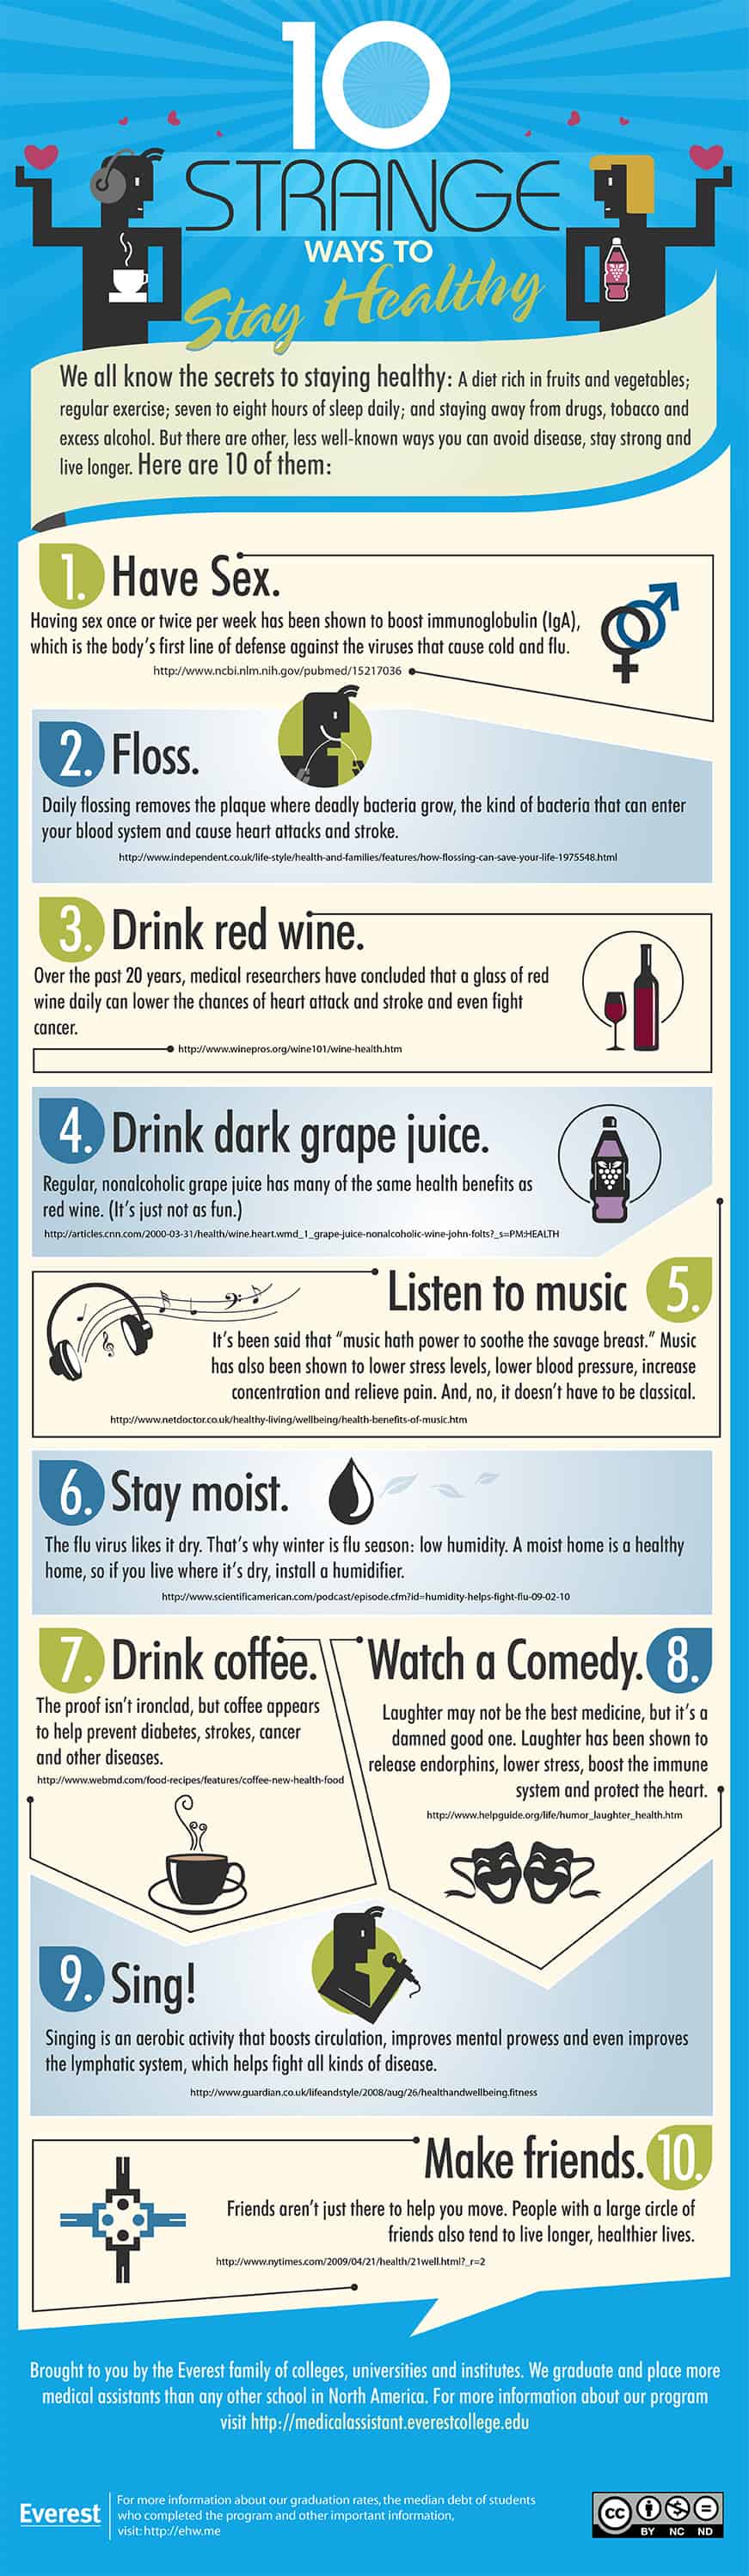 Ways to Stay Healthy